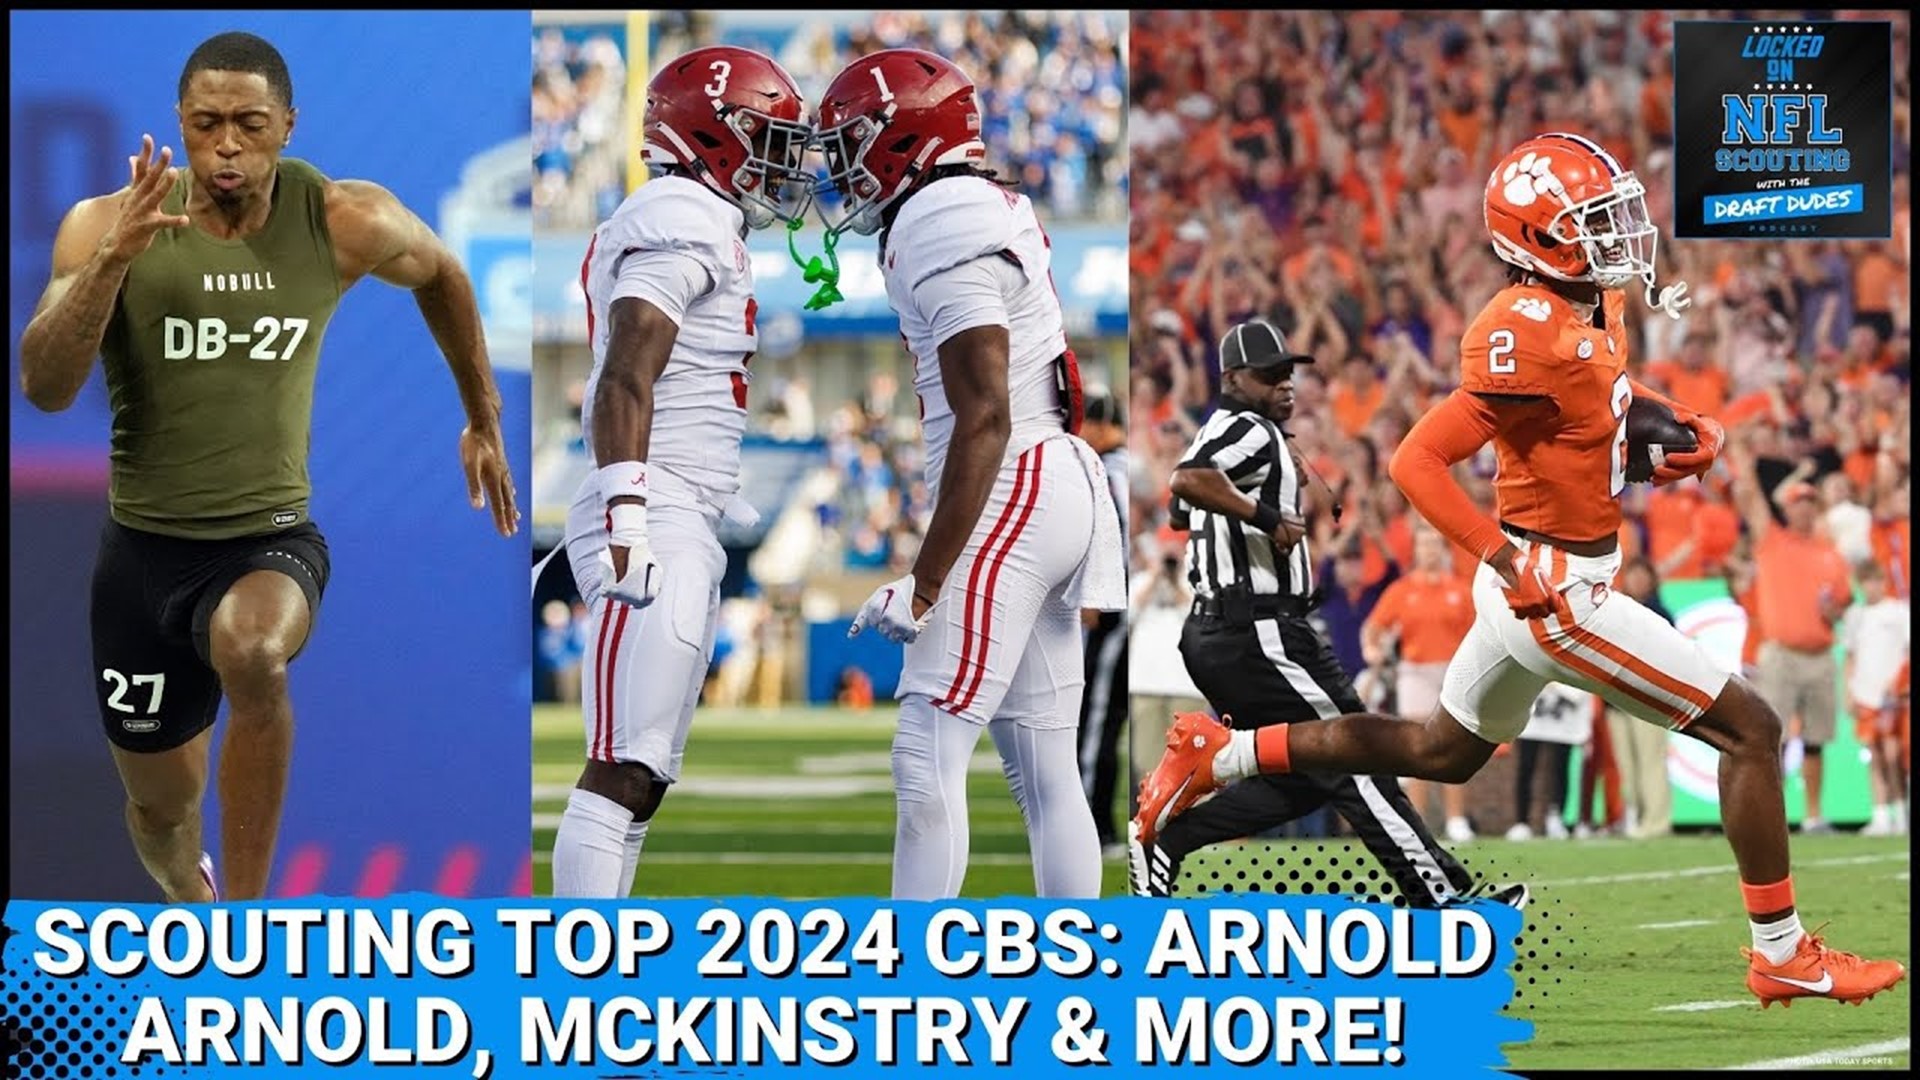 The NFL is always looking to solidify the cornerback position and the 2024 NFL Draft has several attractive options.